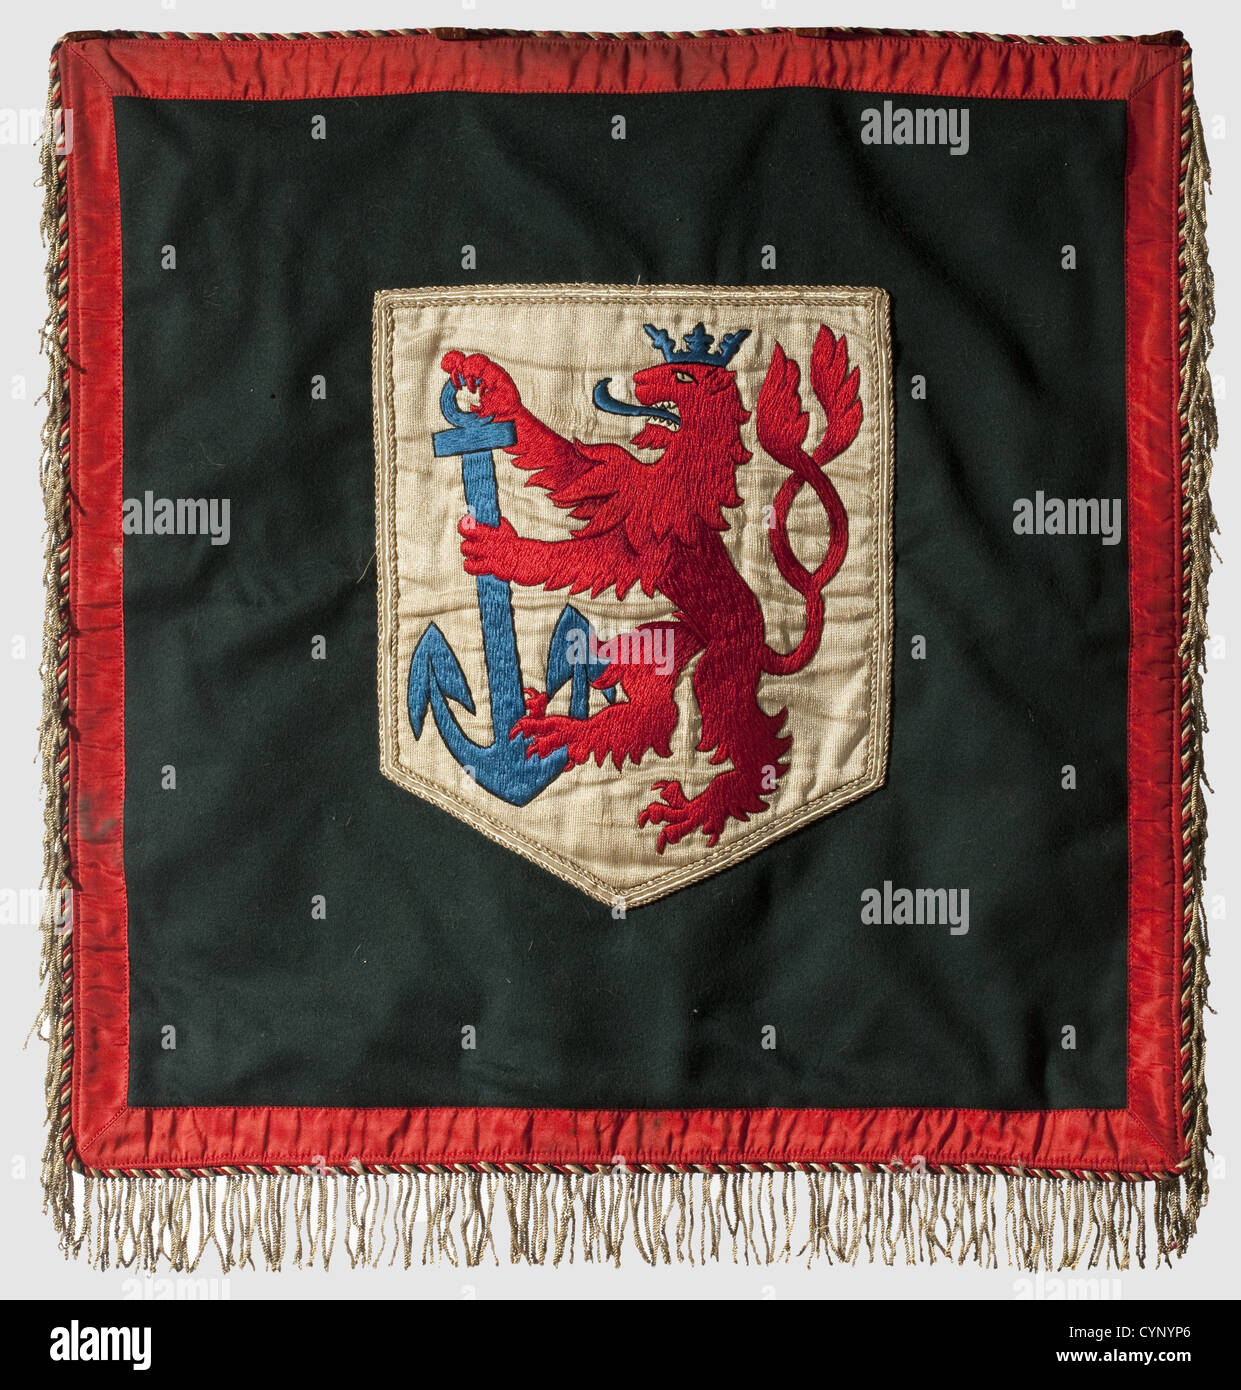 A trumpet cloth,of Artillery Regiment 26 with three-sided gold fringe. The obverse of red silk(damaged)with gold-embroidered regimental cipher within an oak leaf wreath,in each lower corner a gold-embroidered eagle. The reverse with the embroidered Düsseldorf coat of arms on a black background with doubled exterior border of red braid and black-white-red cording. Four leather attachment loops. One small moth hole. Dimensions ca. 48 x 49 cm,historic,historical,1930s,1930s,20th century,artillery,branch of service,branches of service,armed service,ar,Additional-Rights-Clearences-Not Available Stock Photo